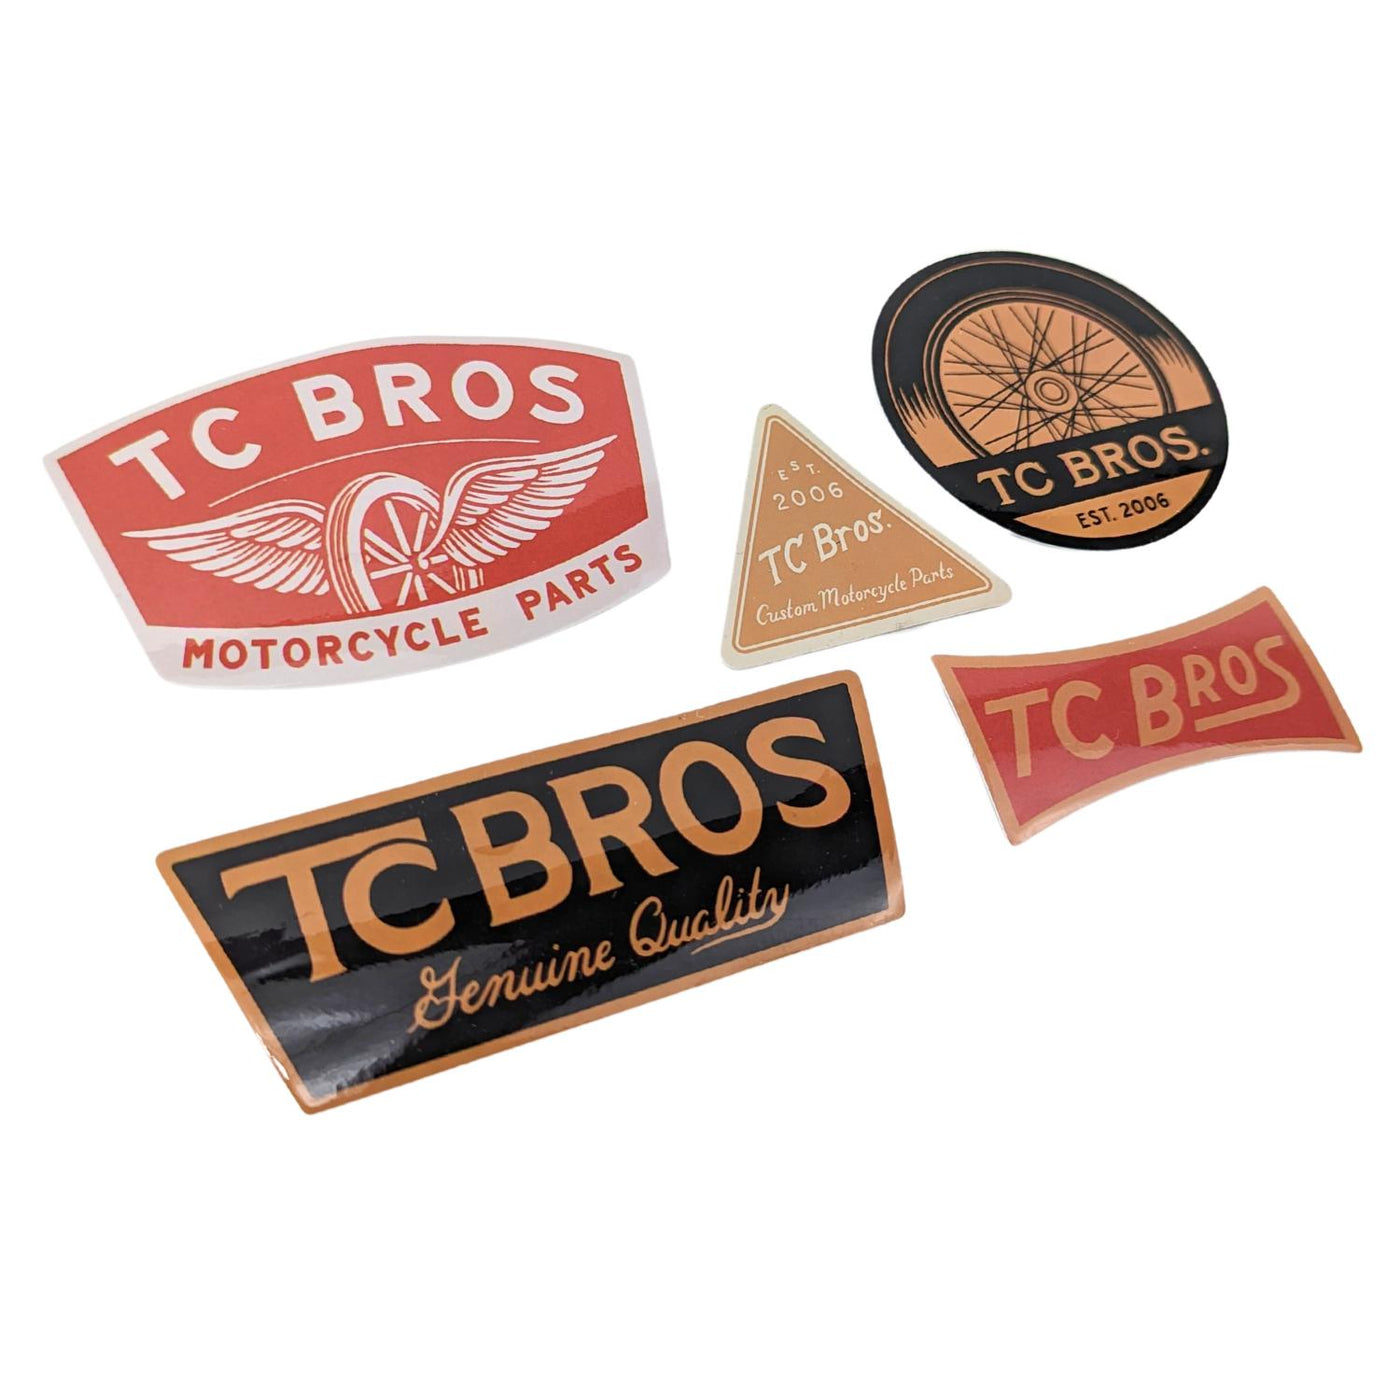 Collection of five TC Bros. Sticker 5 Pack - (Various Designs) including various designs in different shapes and colors, featuring red and black.